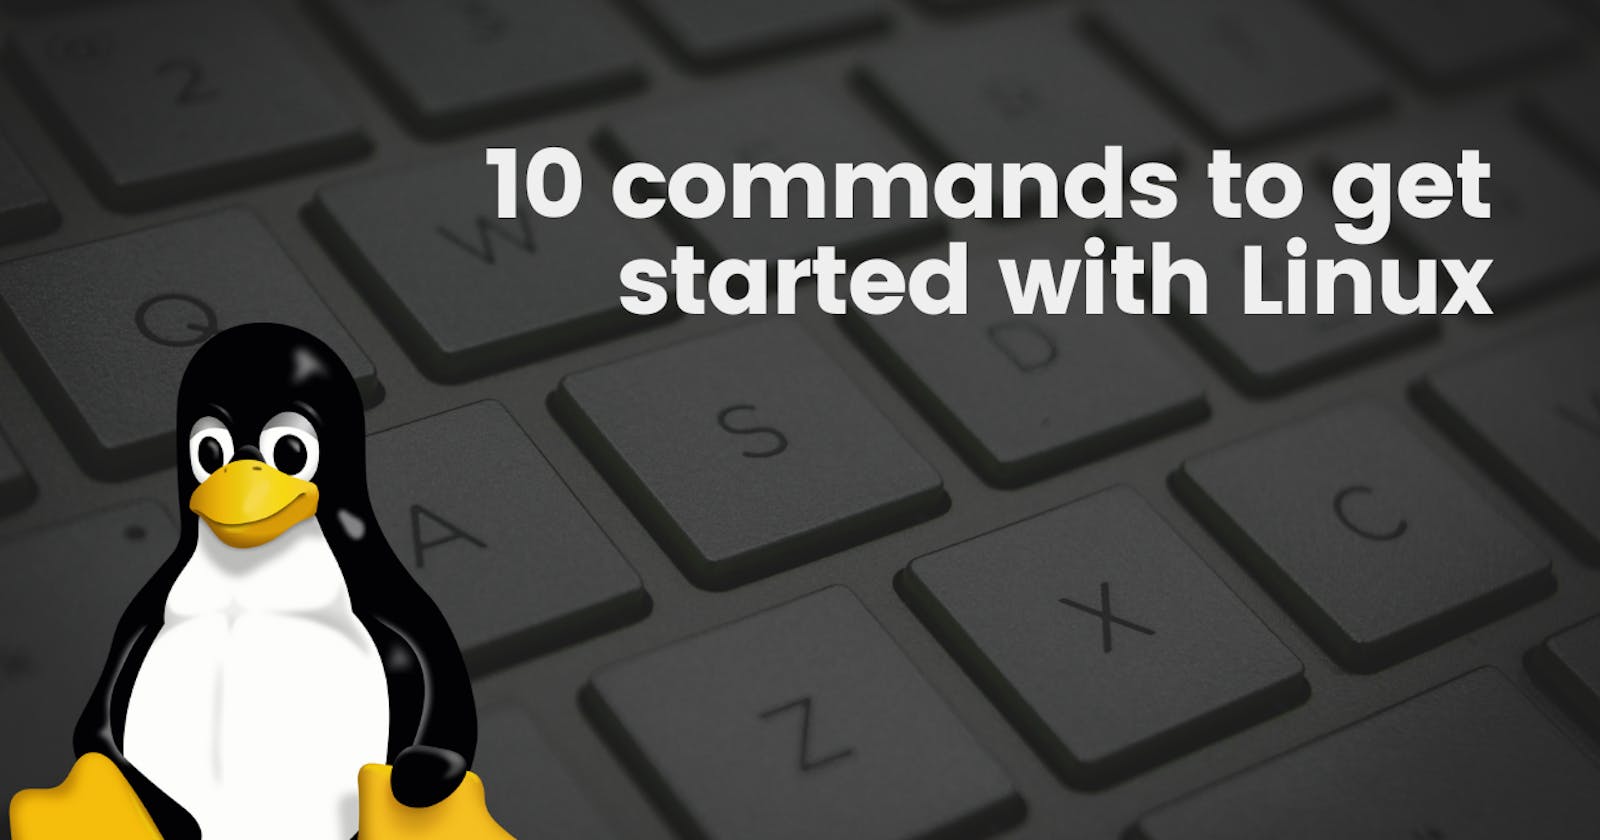 10 commands to get started with Linux